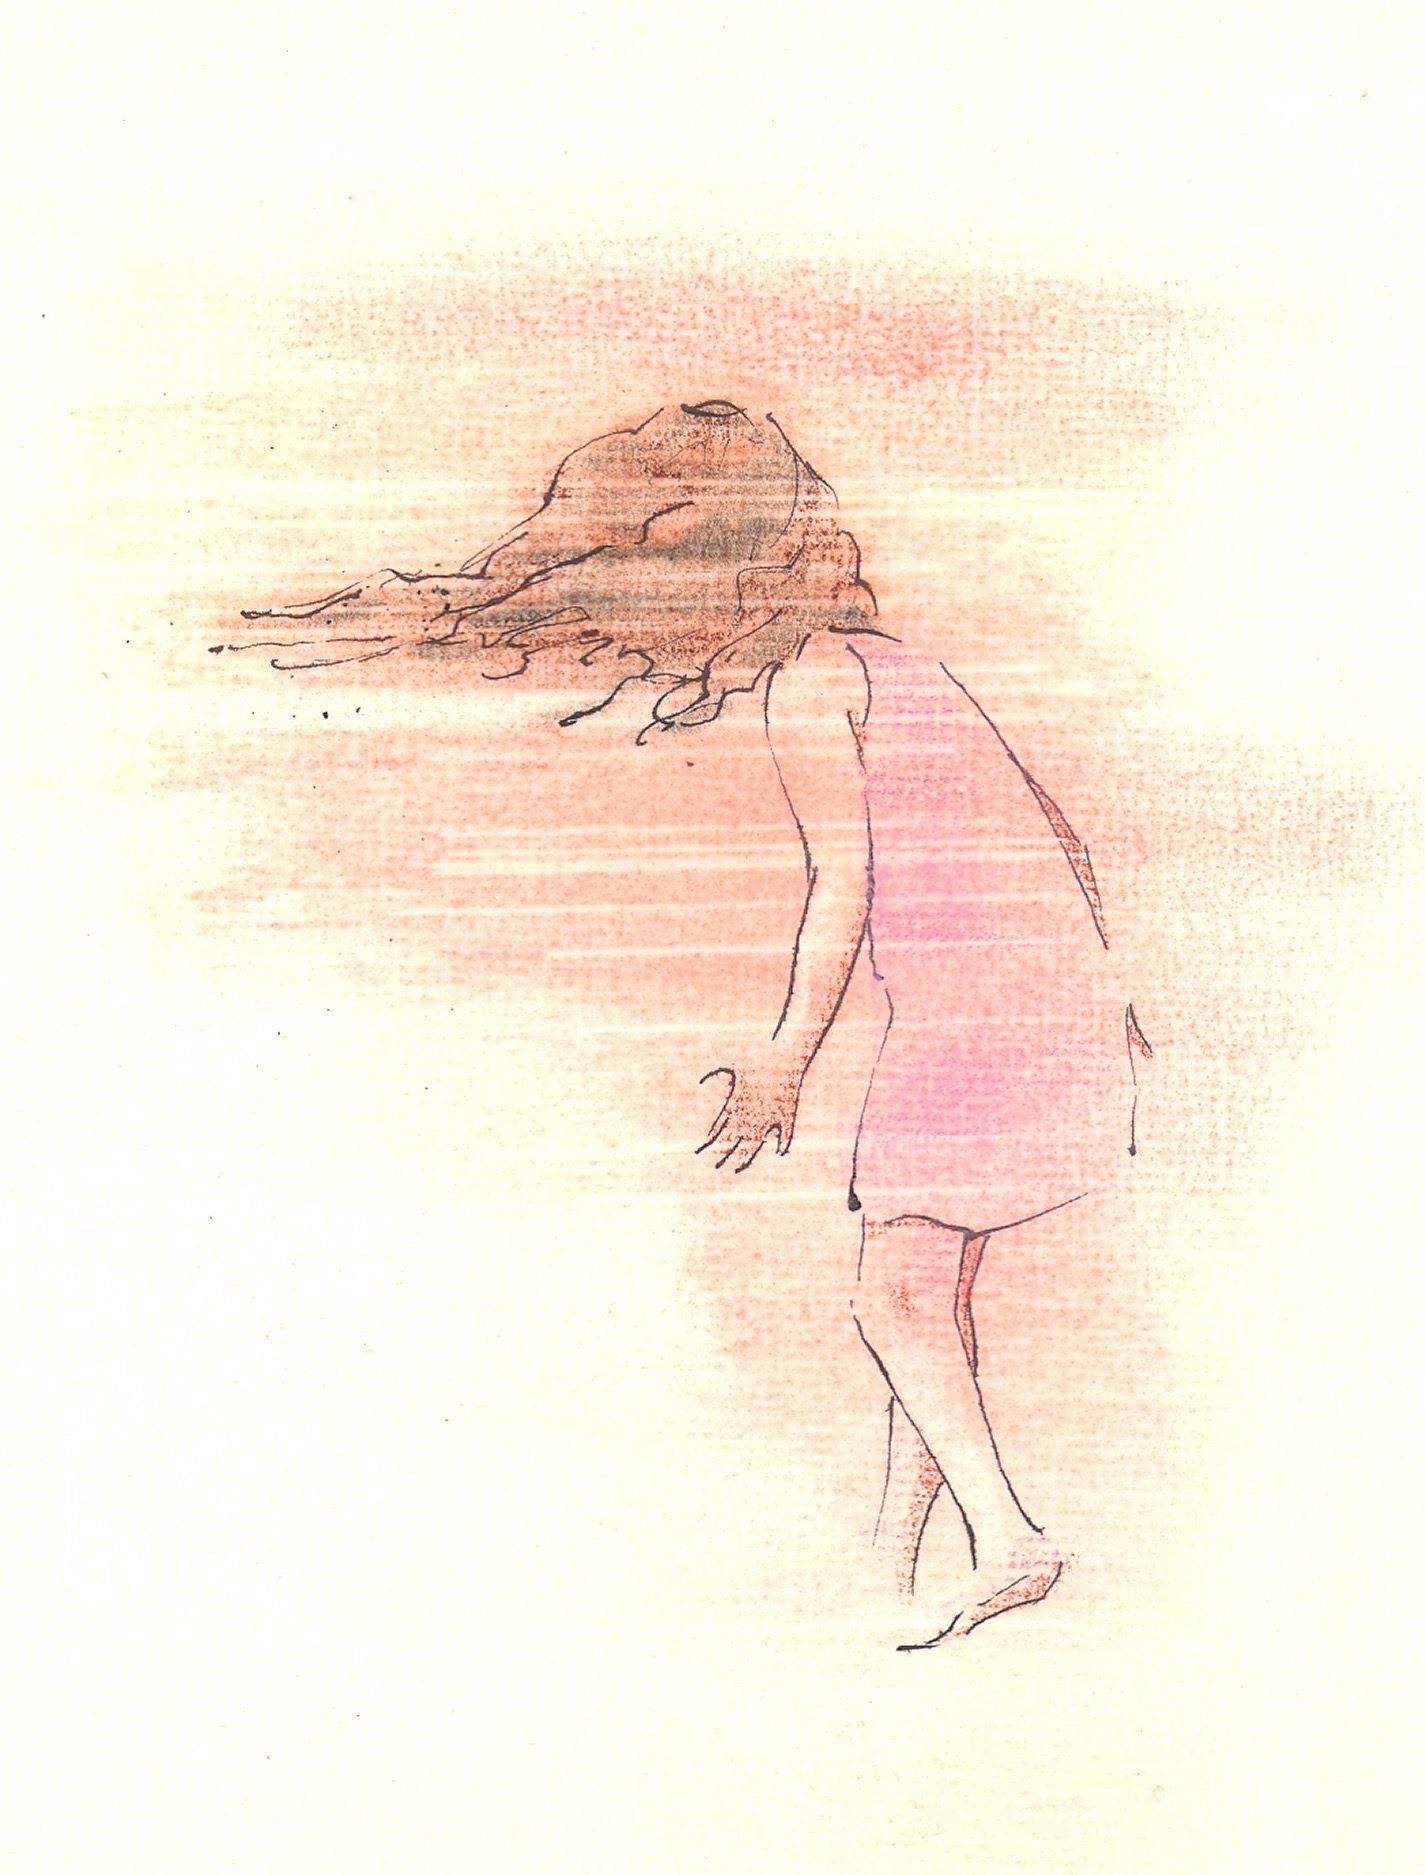   Girl in the Wind  ink and pastel 4.5” x 6” 2009 